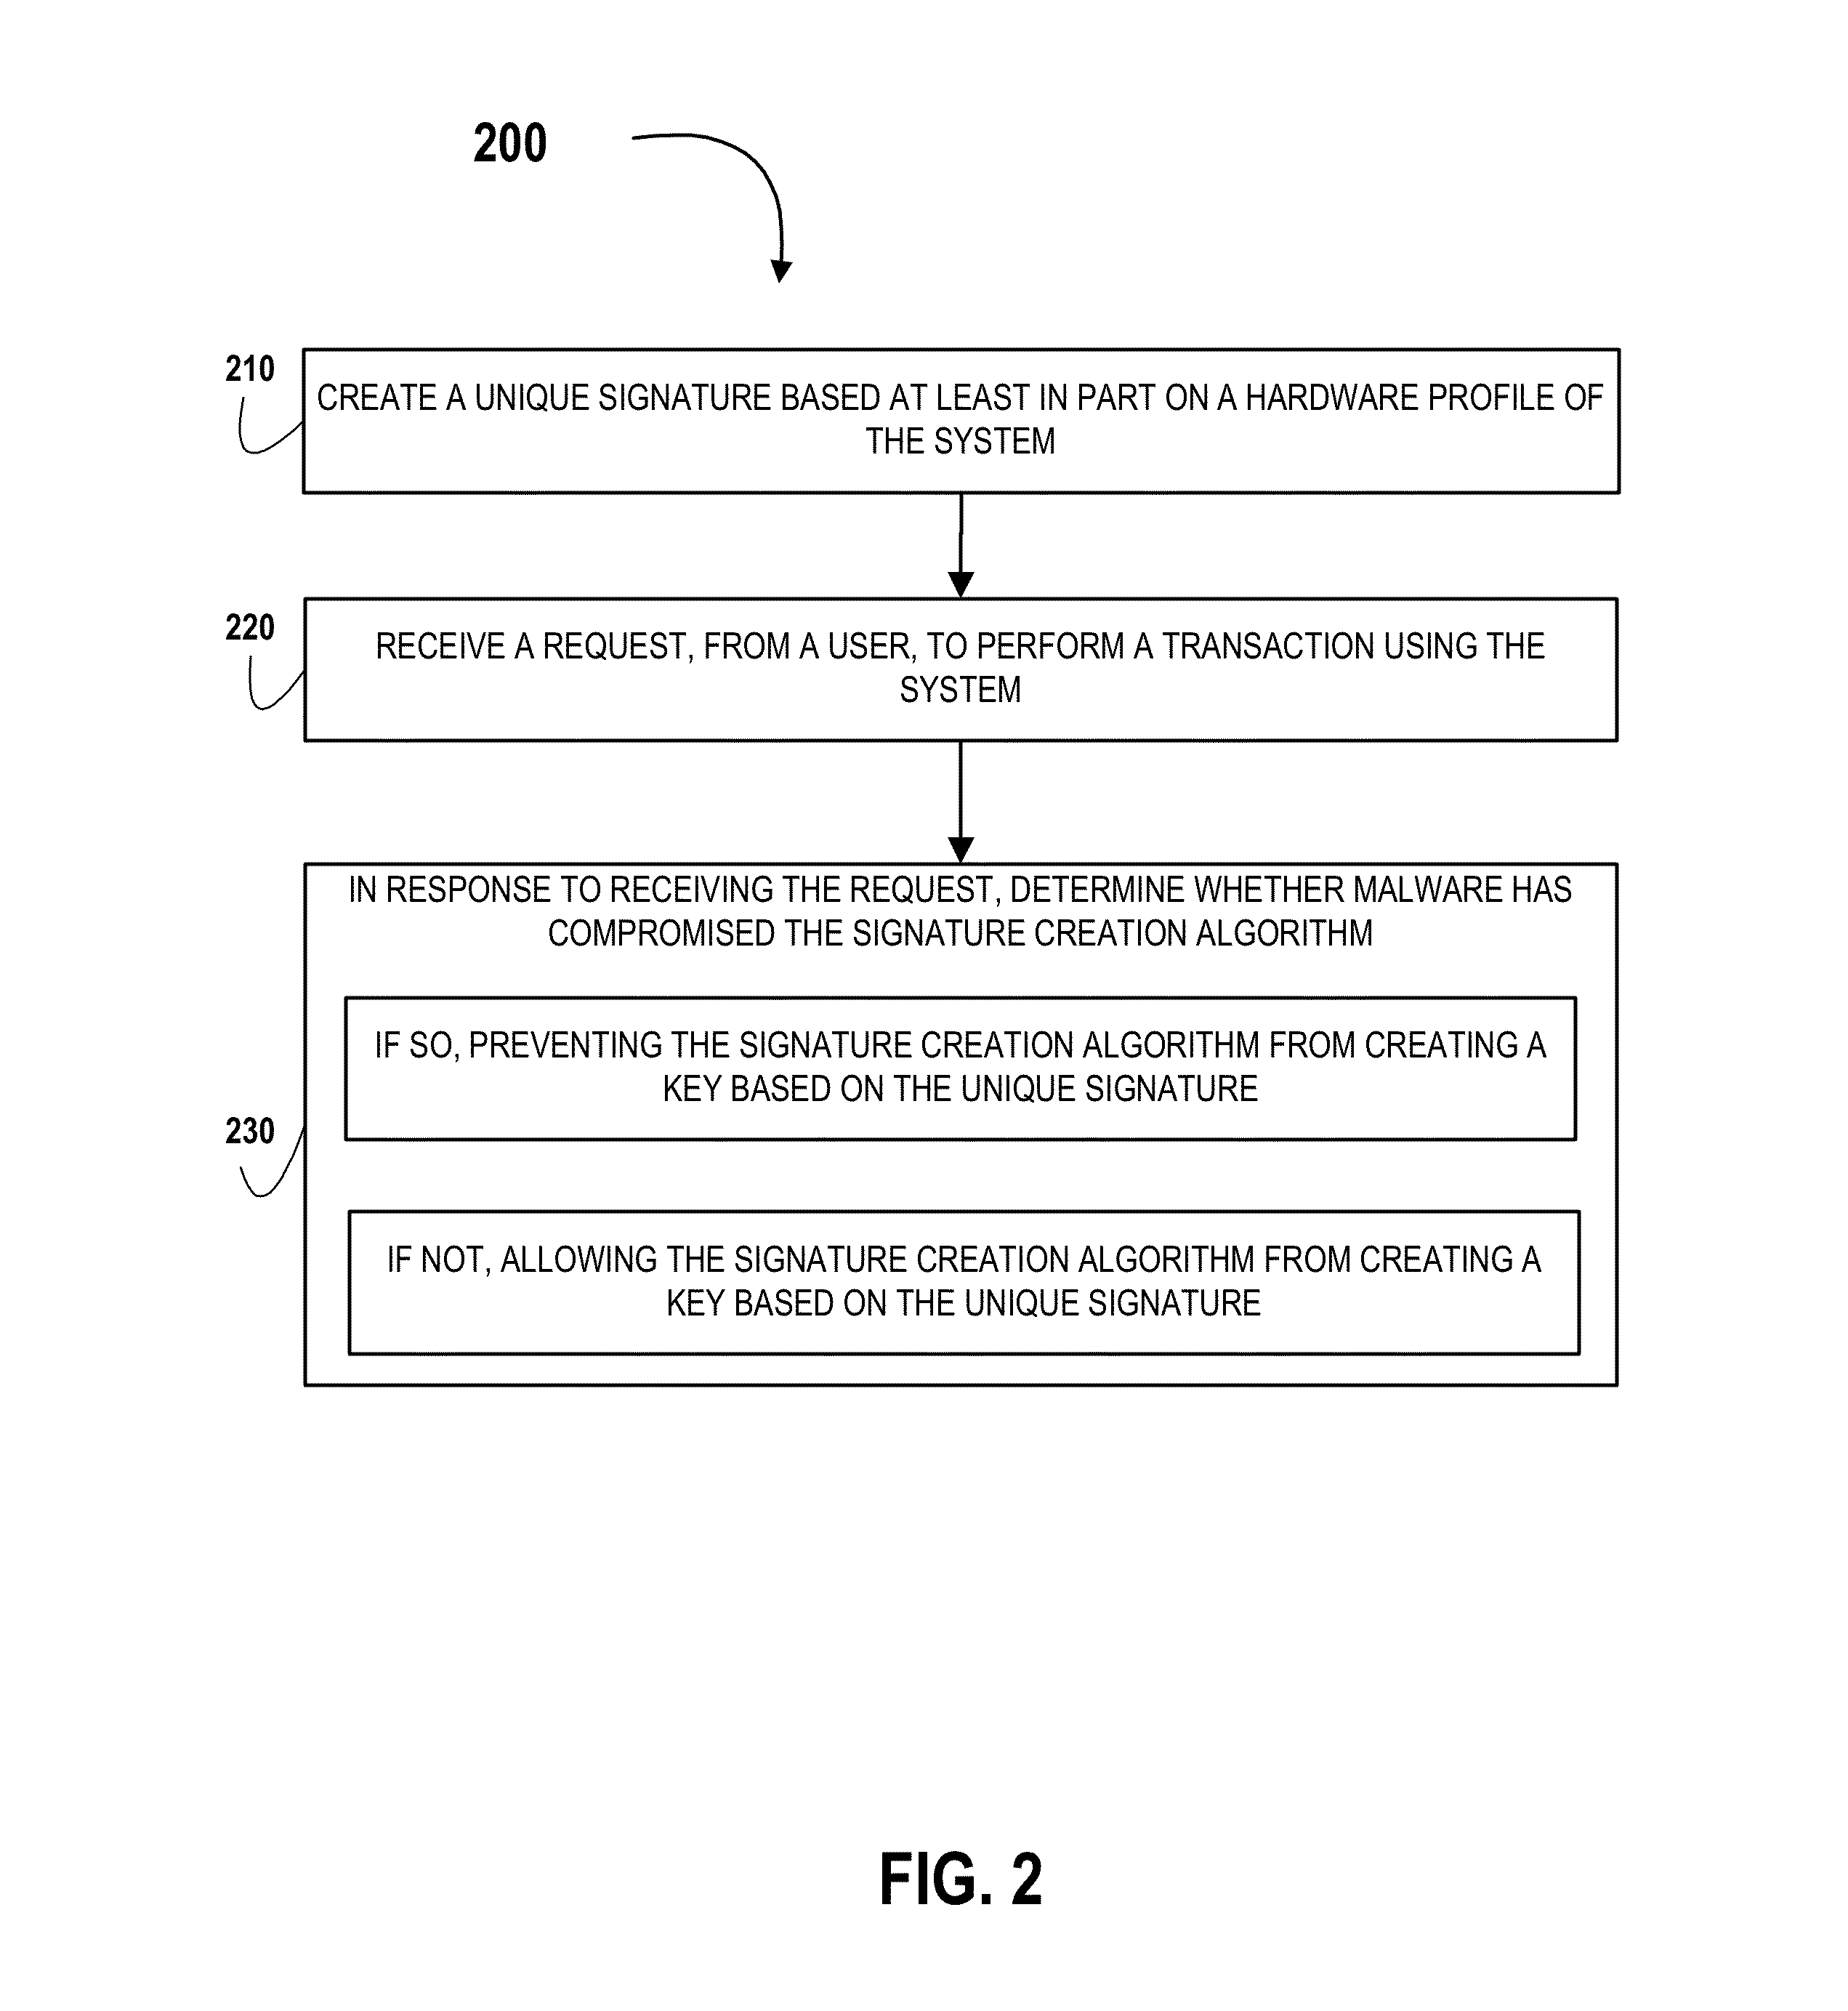 Tool for creating a system hardware signature for payment authentication